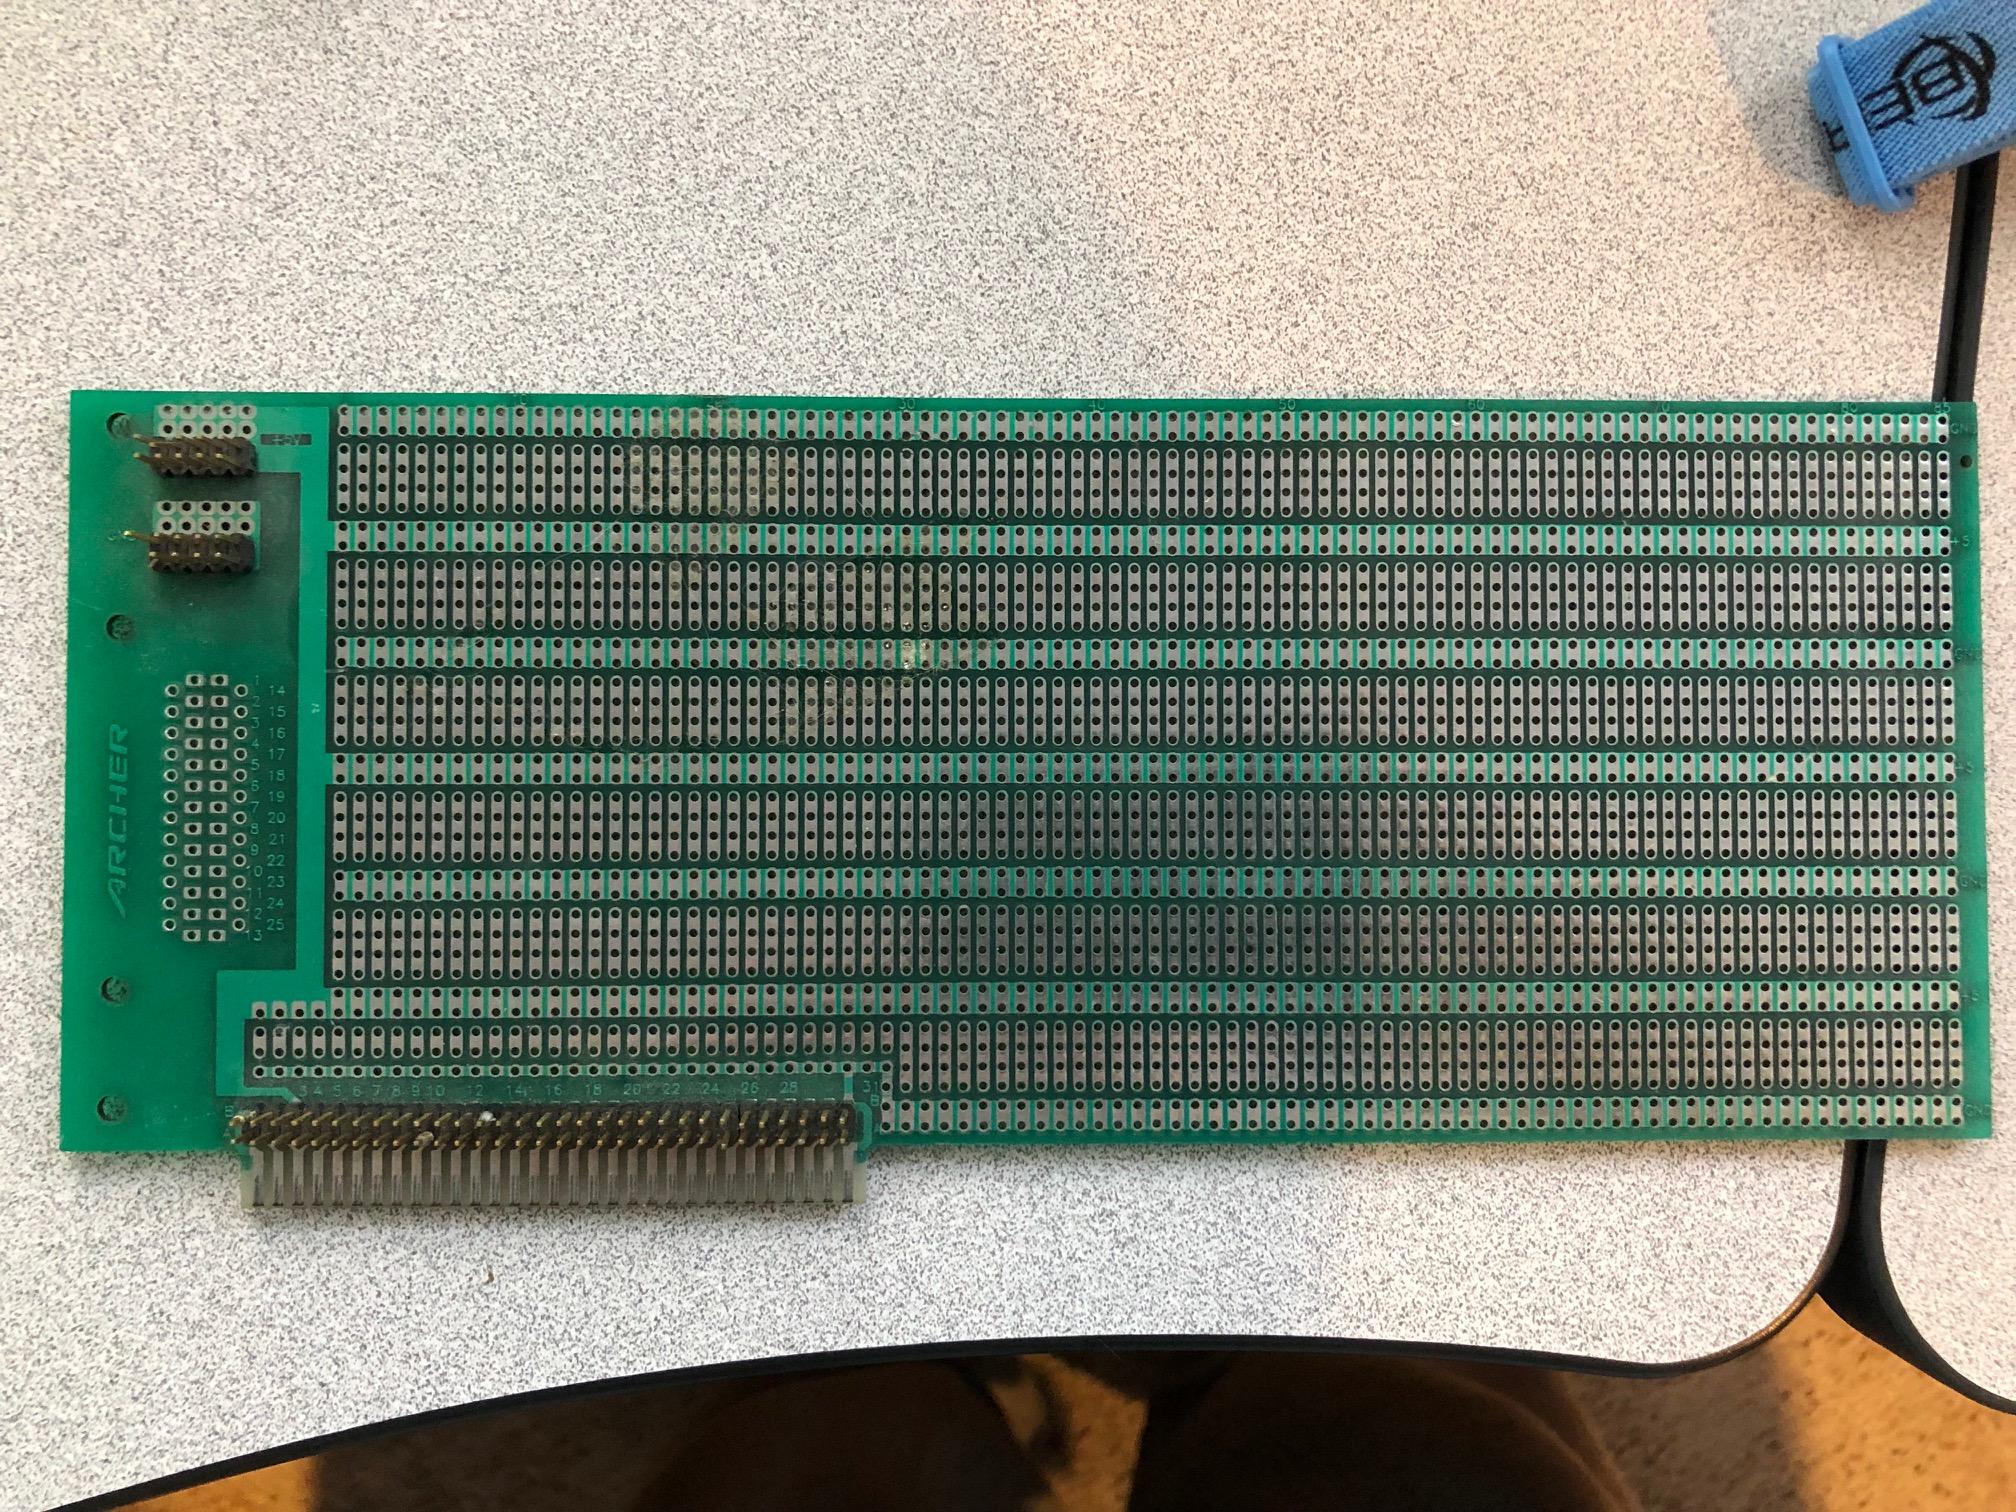 Old IBM compatible PC/XT/AT cards